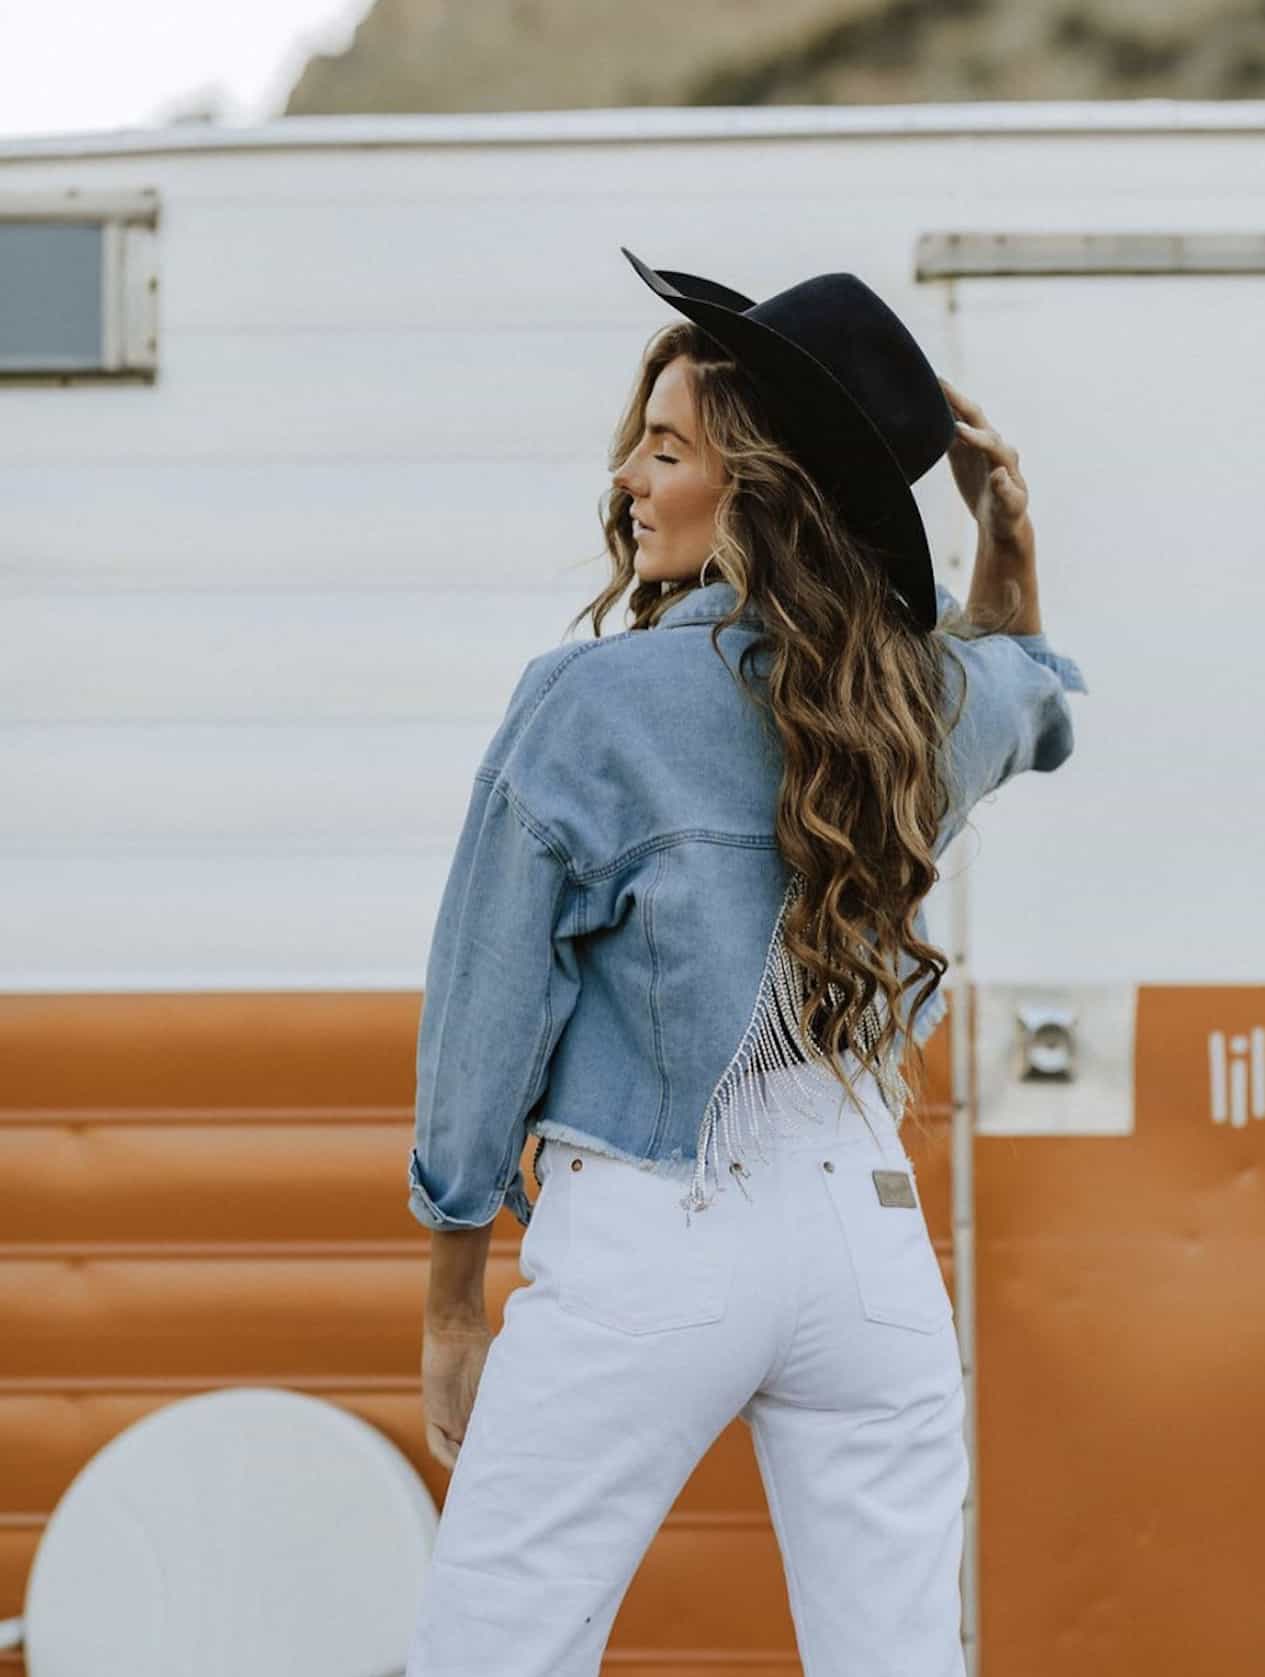 the backside of a woman standing in front of a trailer wearing white wrangler jeans, a denim jacket, and a black cowboy hat